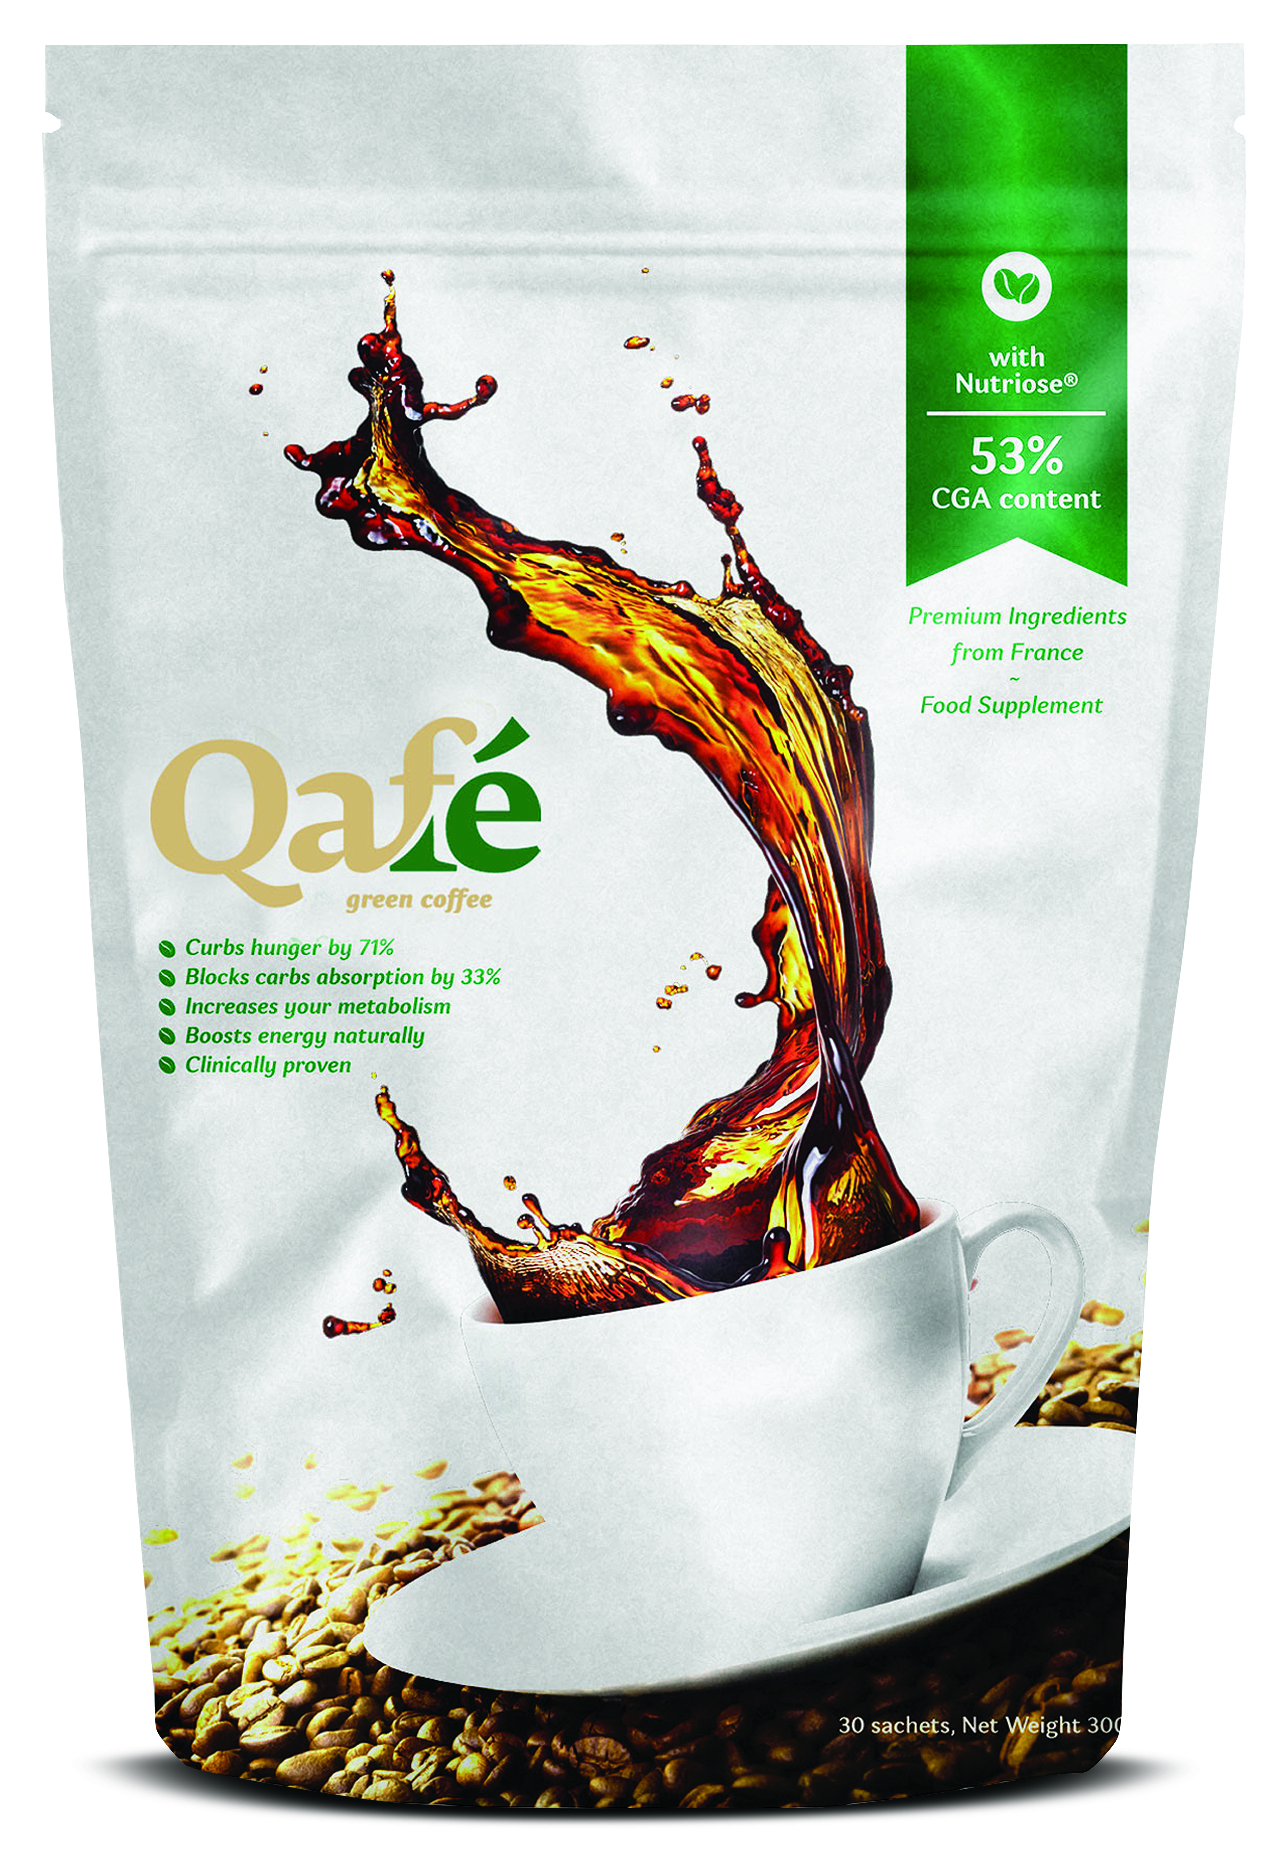 Can You Lose Weight Faster with Qafé Slimming Coffee?